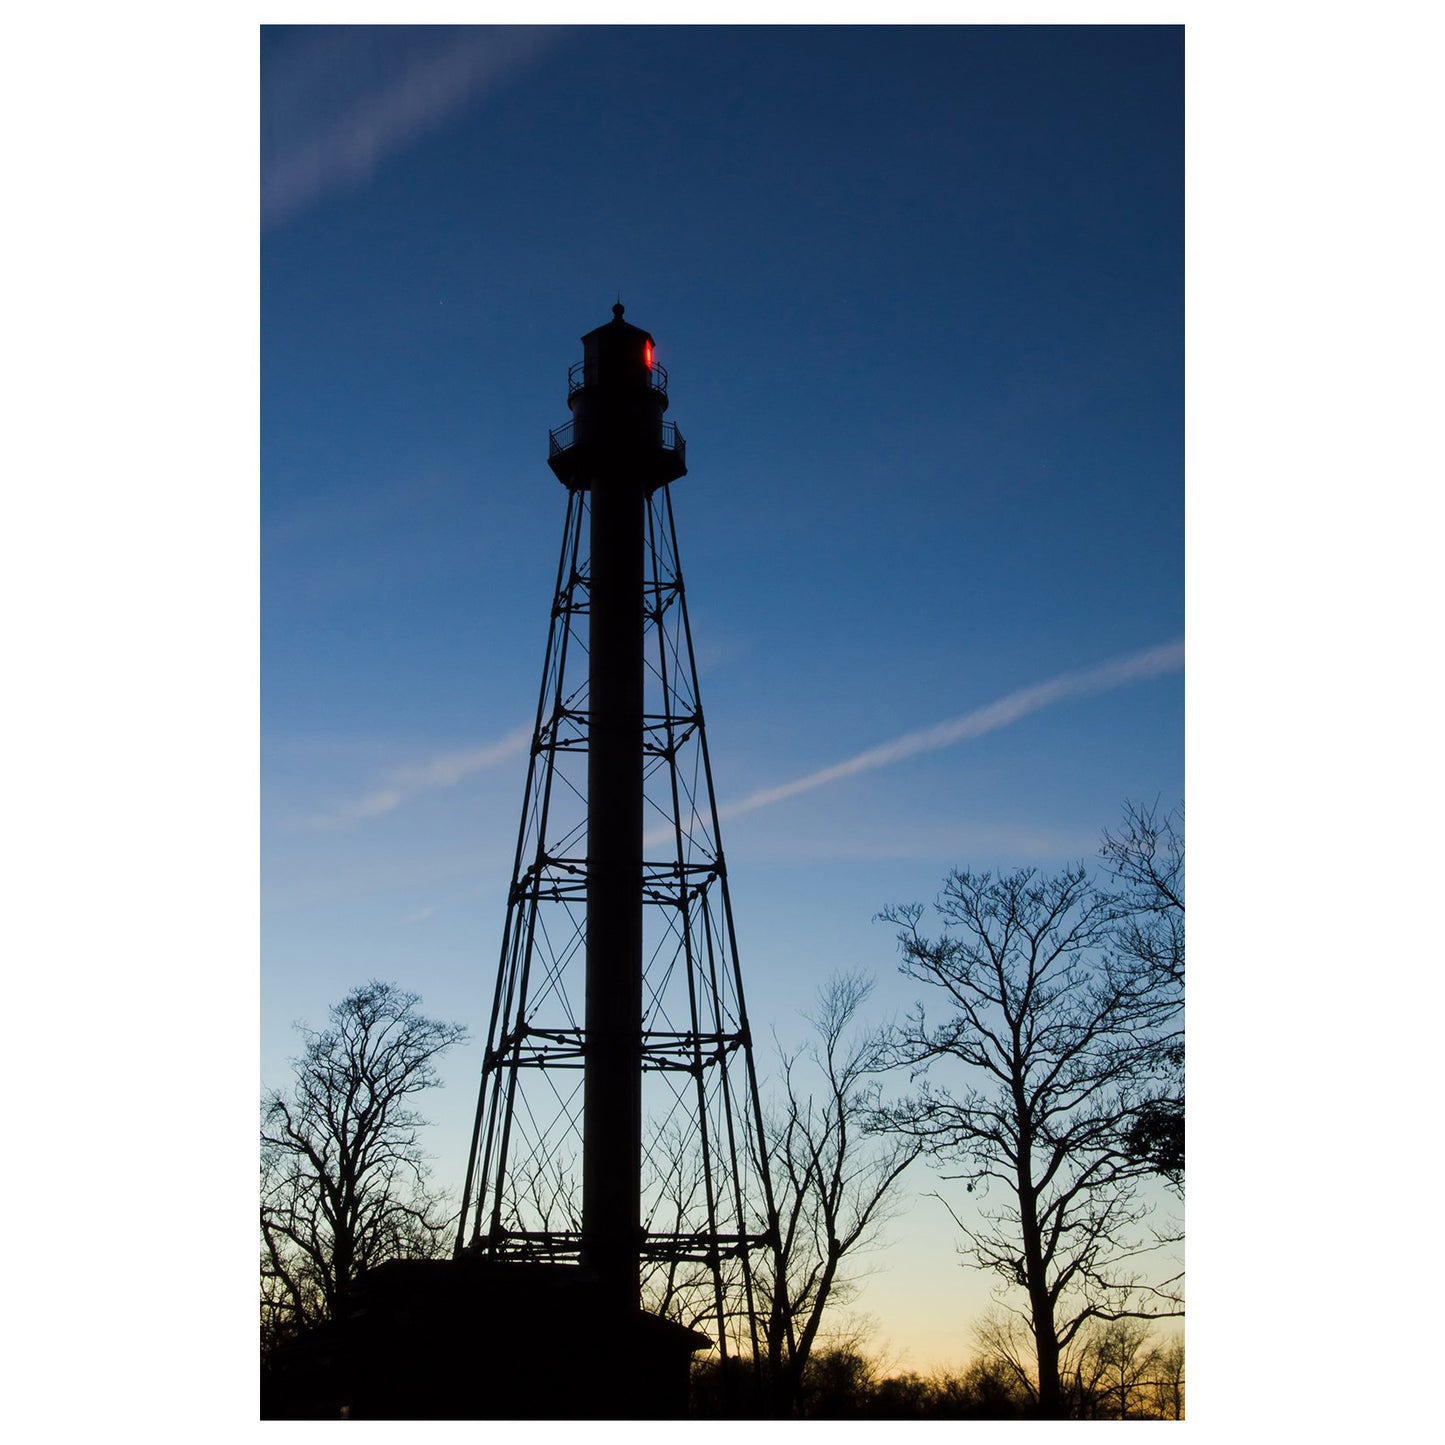 Reedy Point Rear Lighthouse Silhouette Night Photo Fine Art Canvas Wall Art Prints  - PIPAFINEART